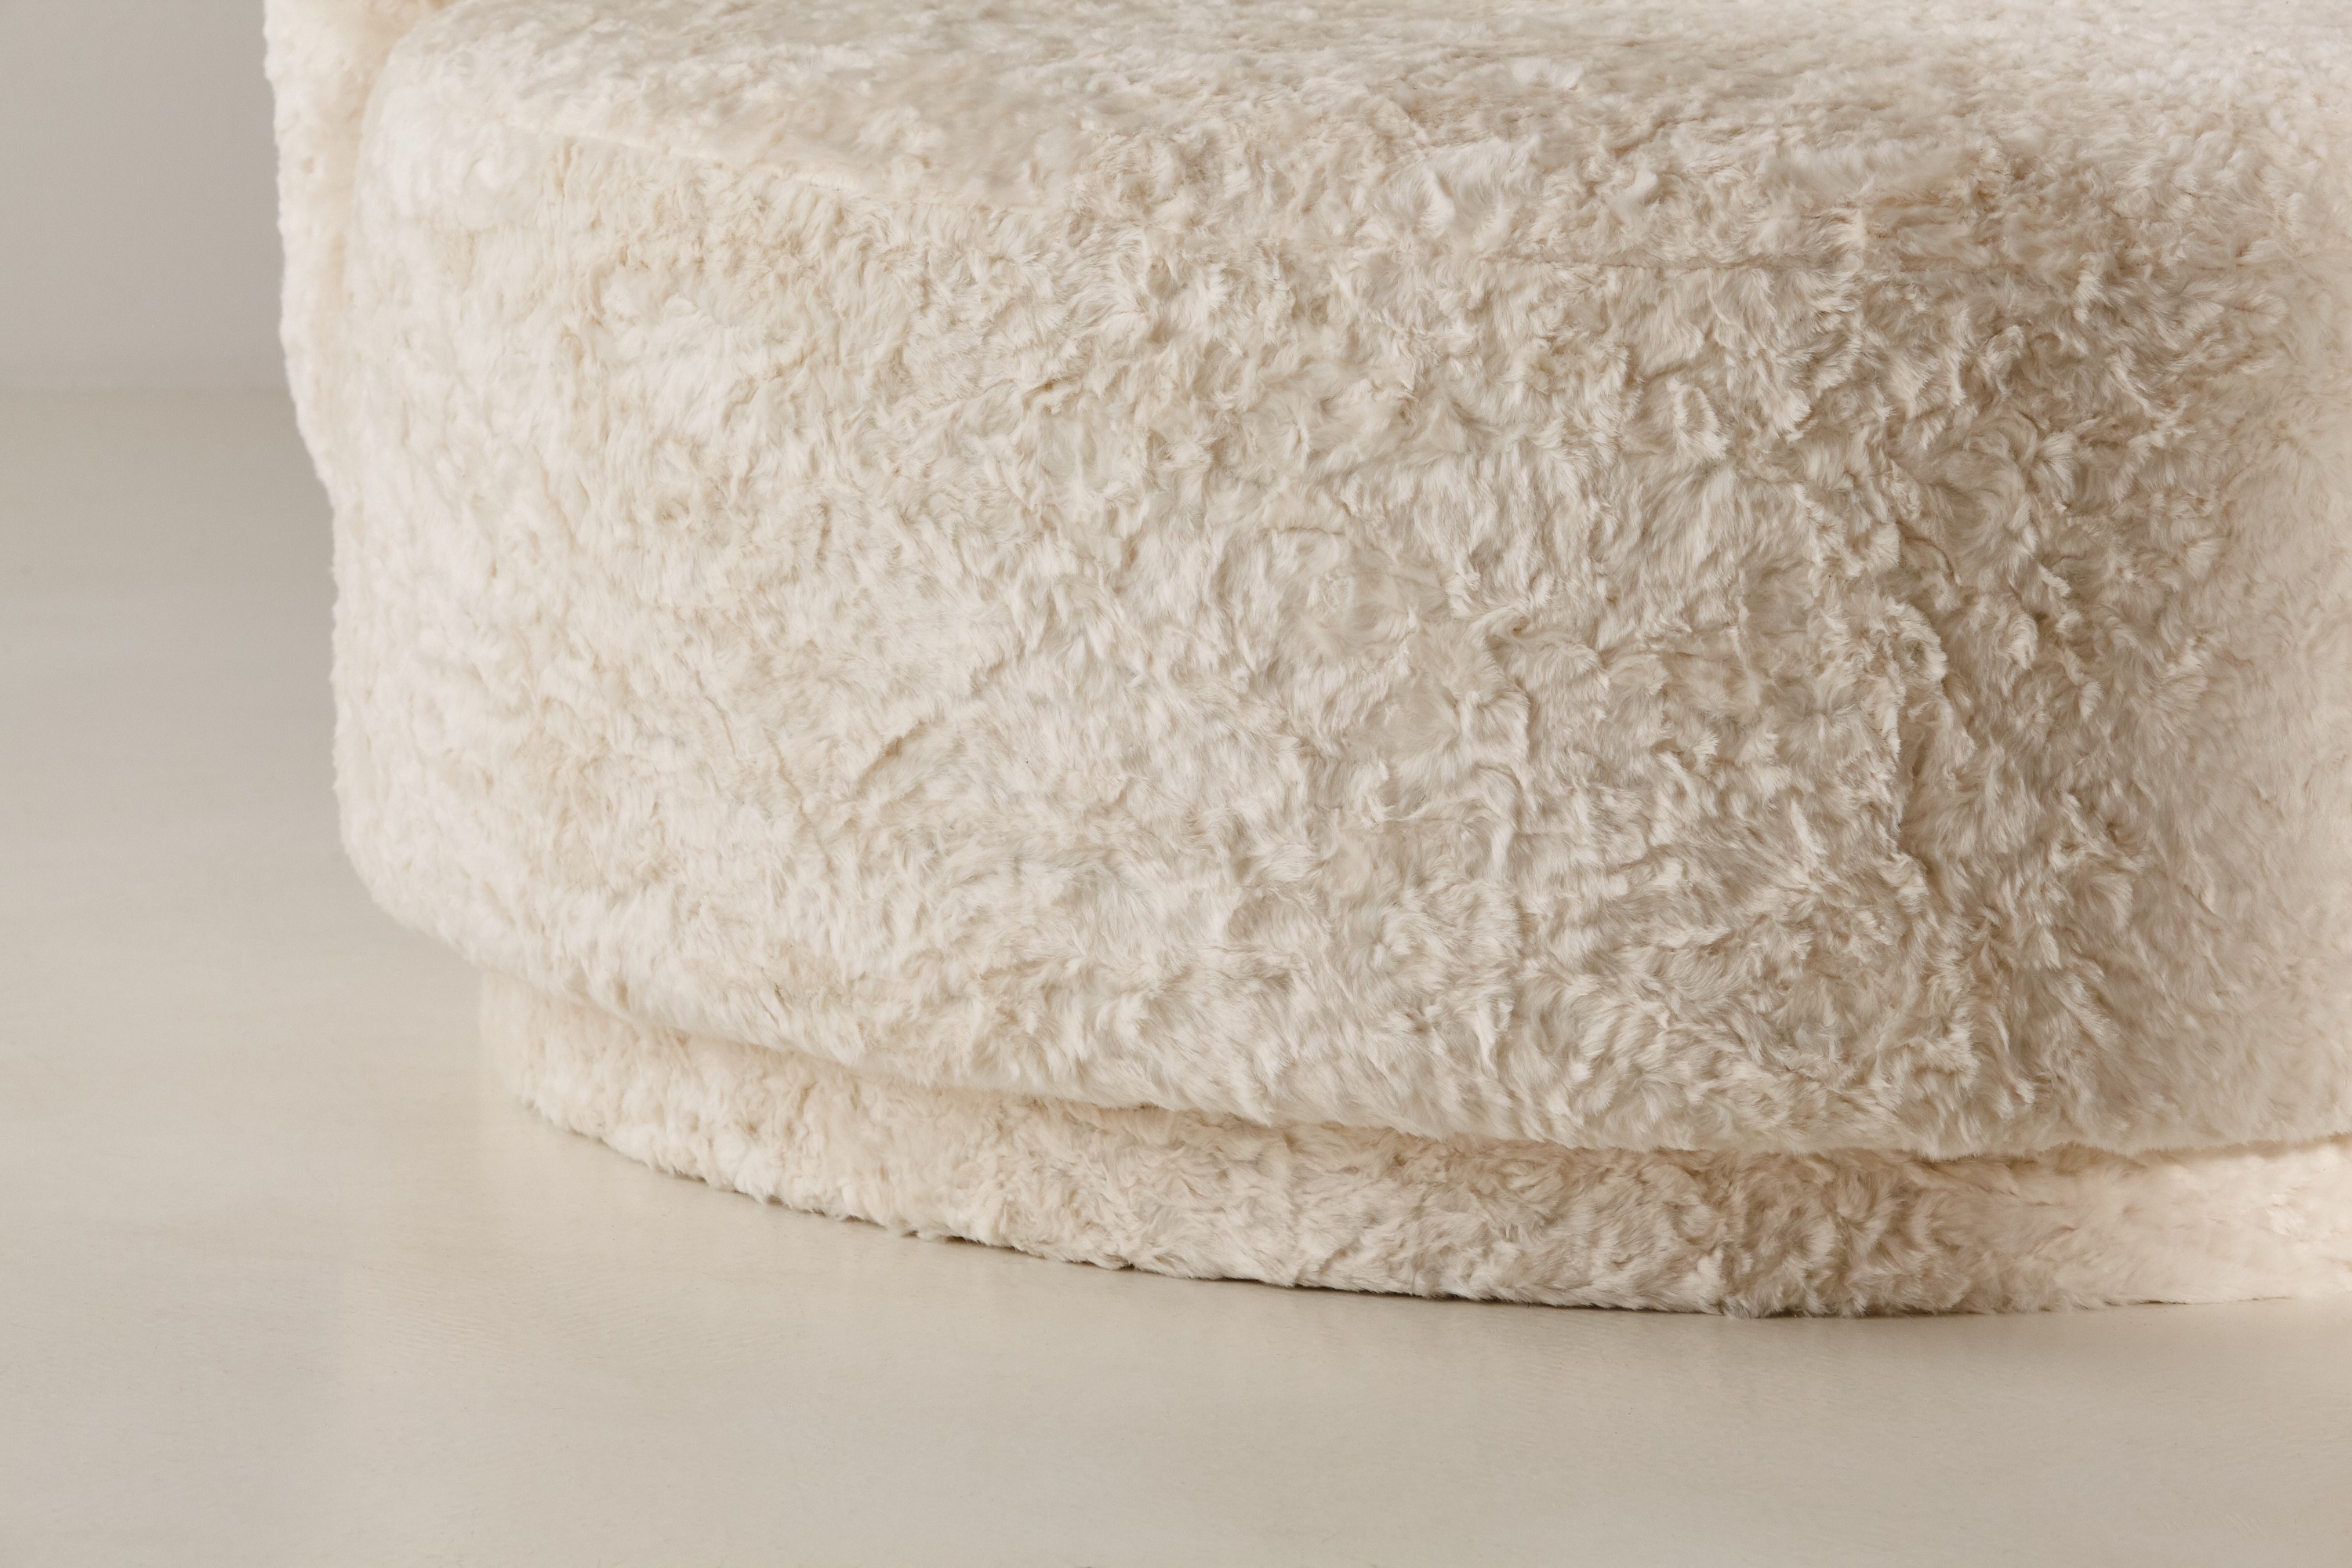 a large white round ottoman with a long pile of fur on top of it